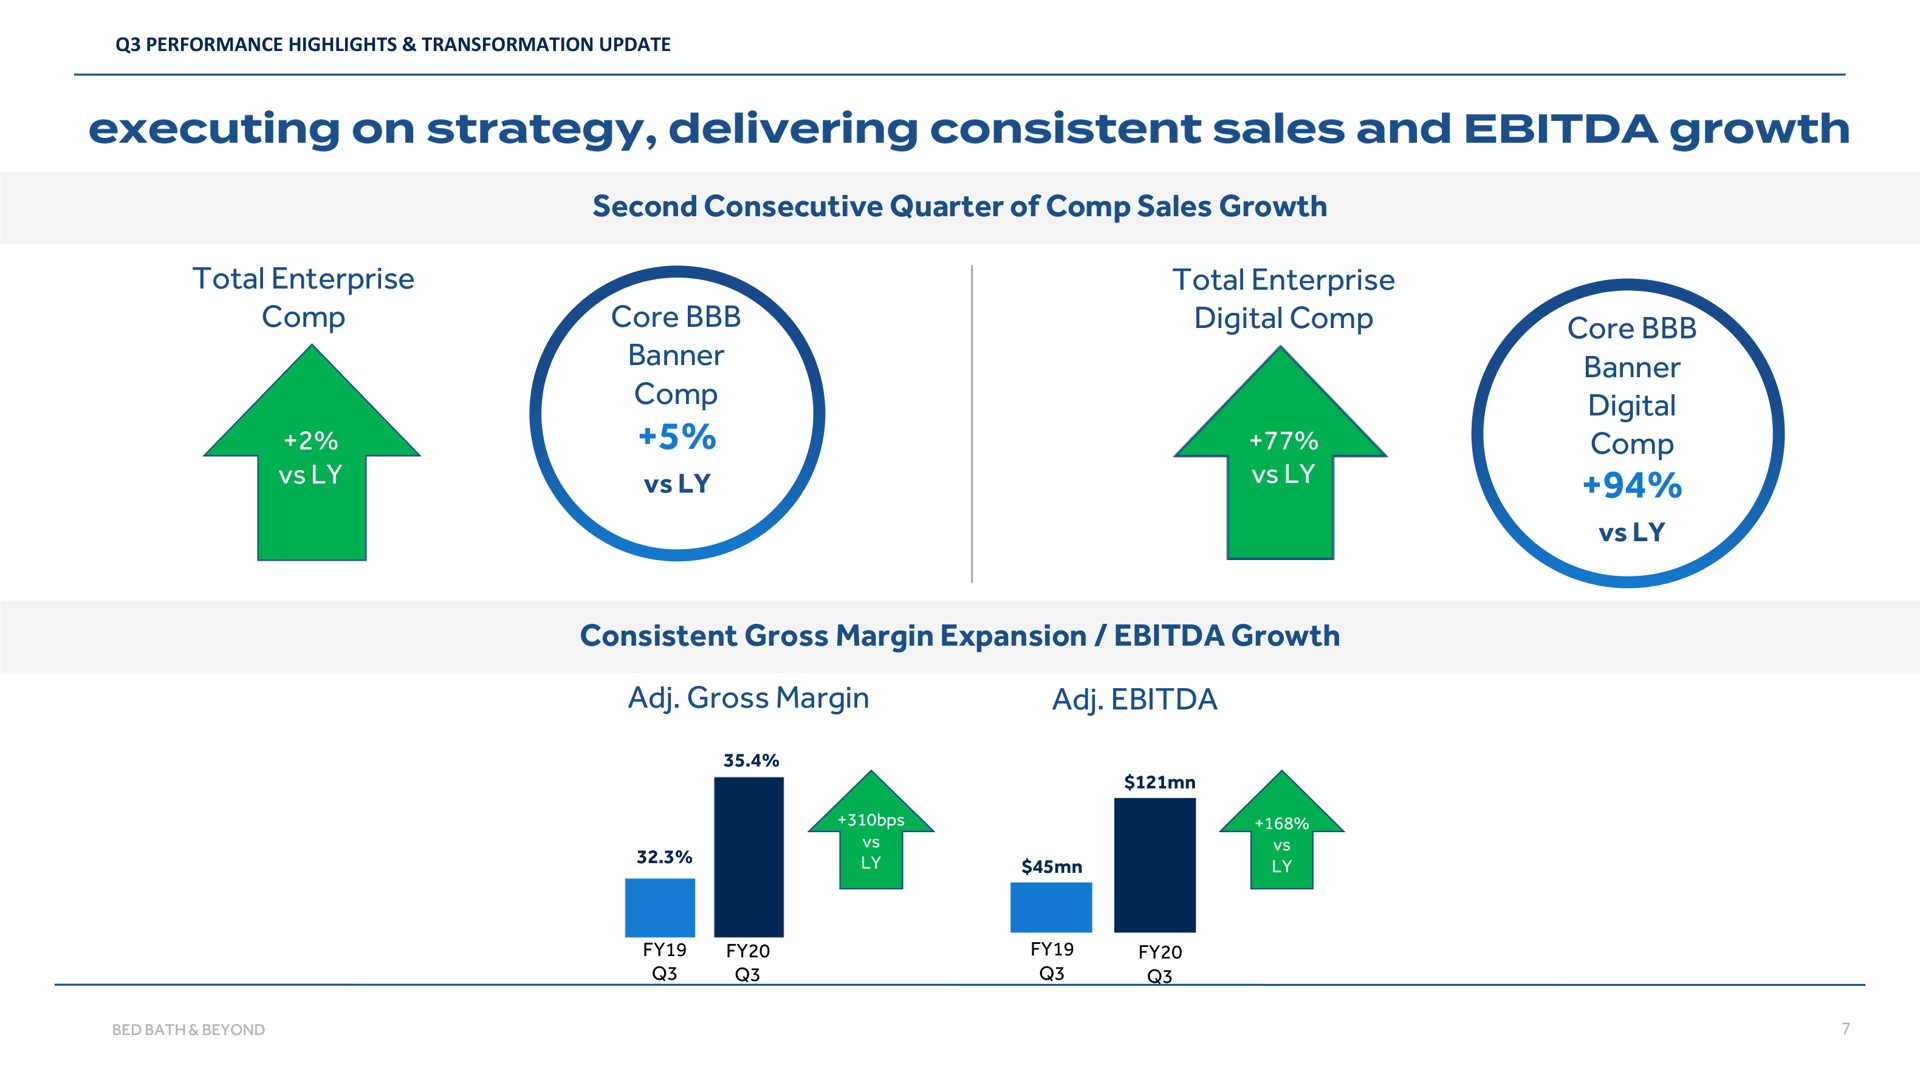 second consecutive quarter of sales growth total enterprise core banner total enterprise digital core banner digital consistent gross margin expansion growth gross margin executing on strategy delivering and | Bed Bath & Beyond